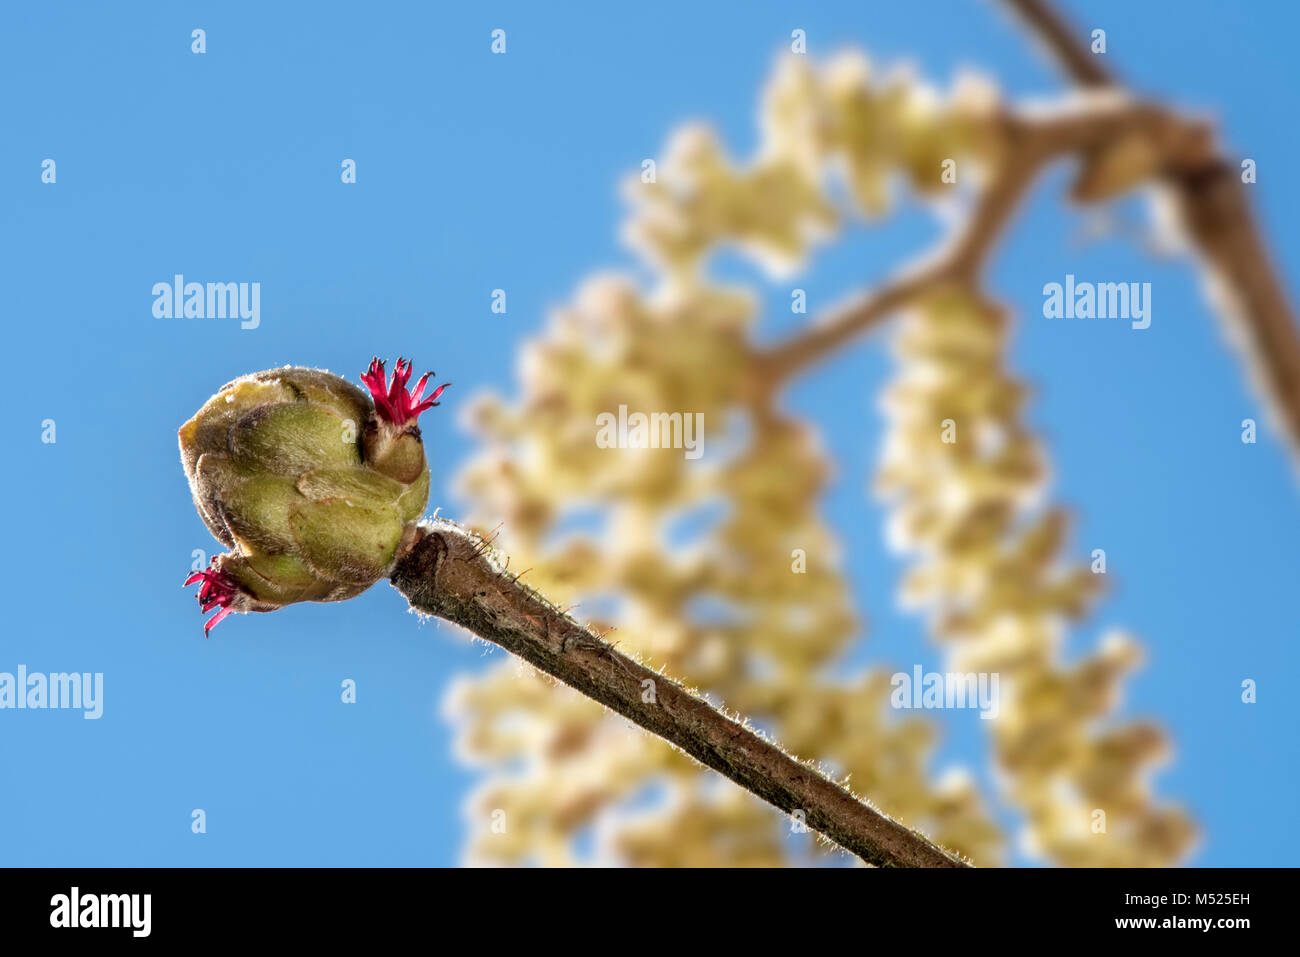 Common hazel (Corylus avellana) close up of female catkin concealed in bud with only the red  styles visible against blue sky Stock Photo